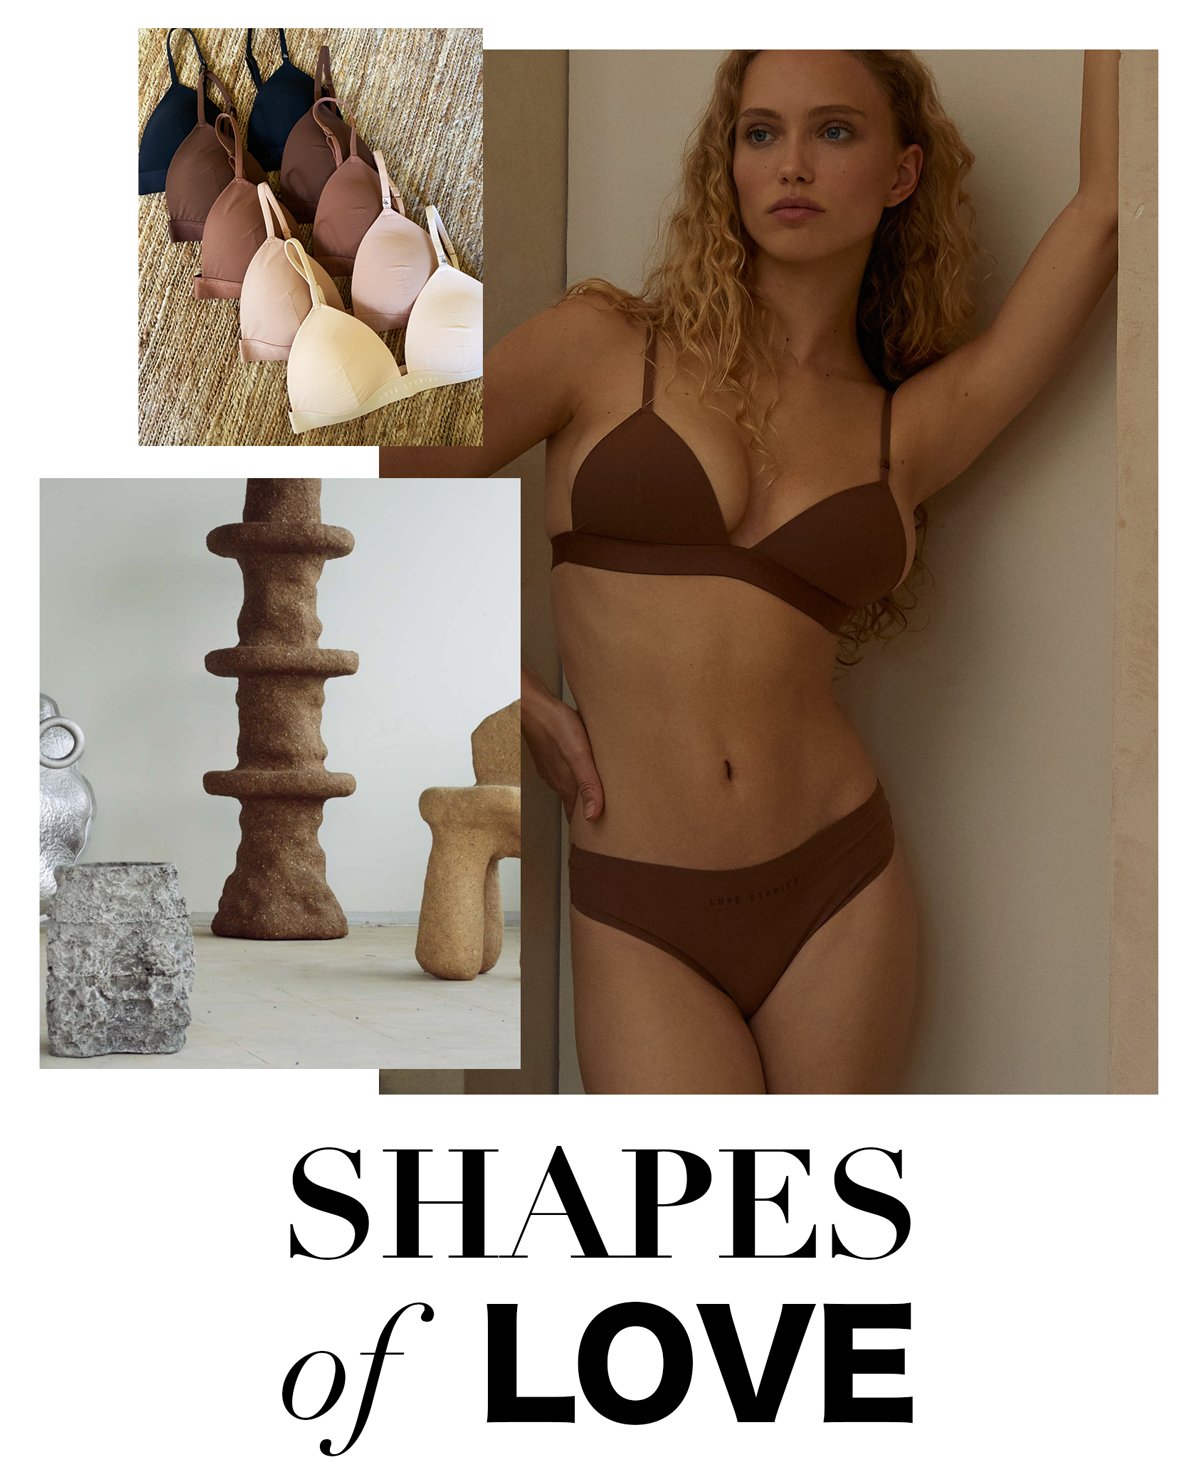 Love Stories: New In: Shapes of Love